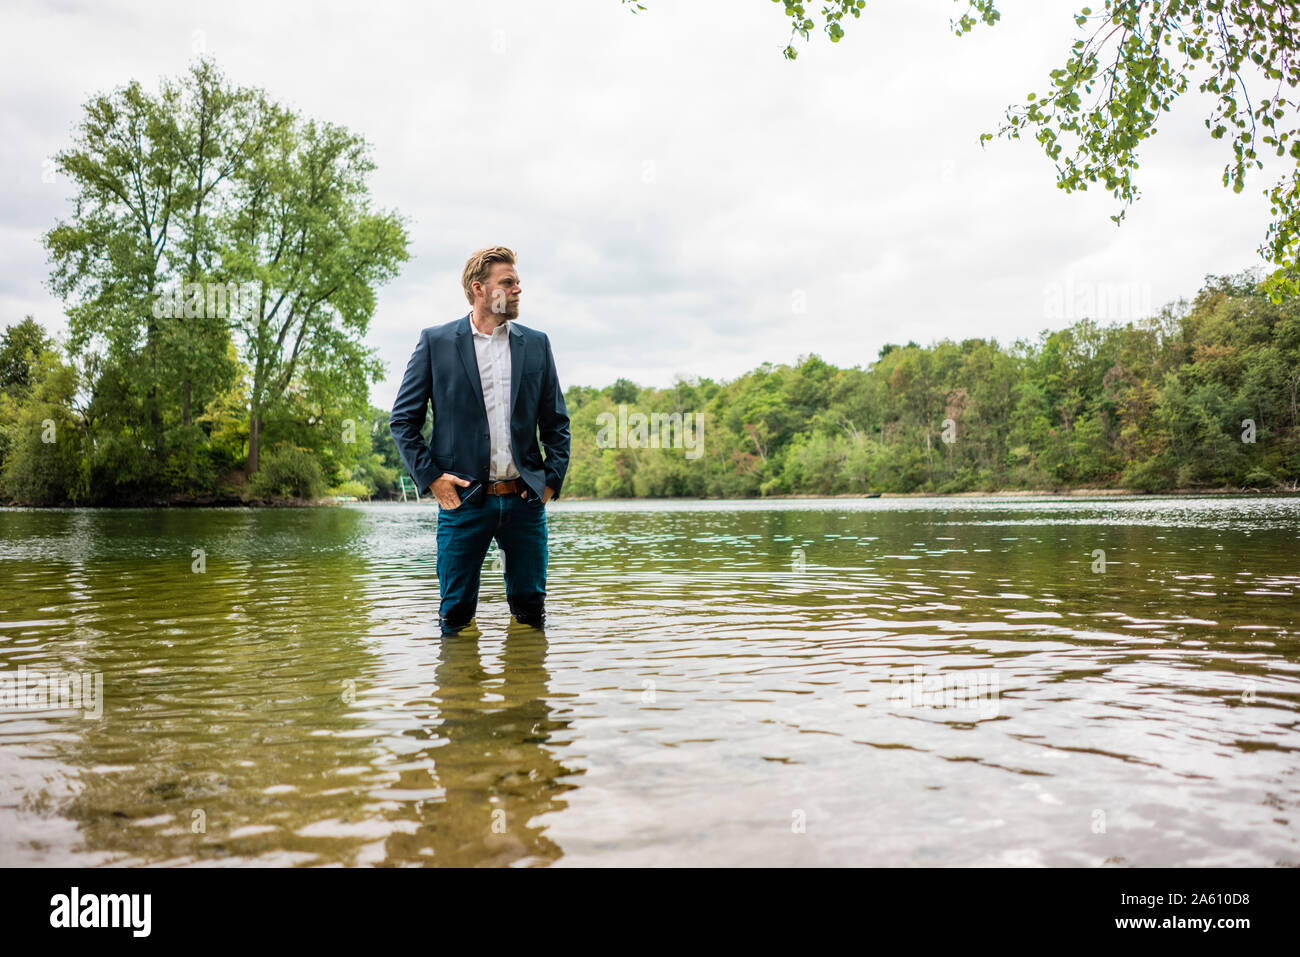 Businessman standing in a lake looking out Stock Photo